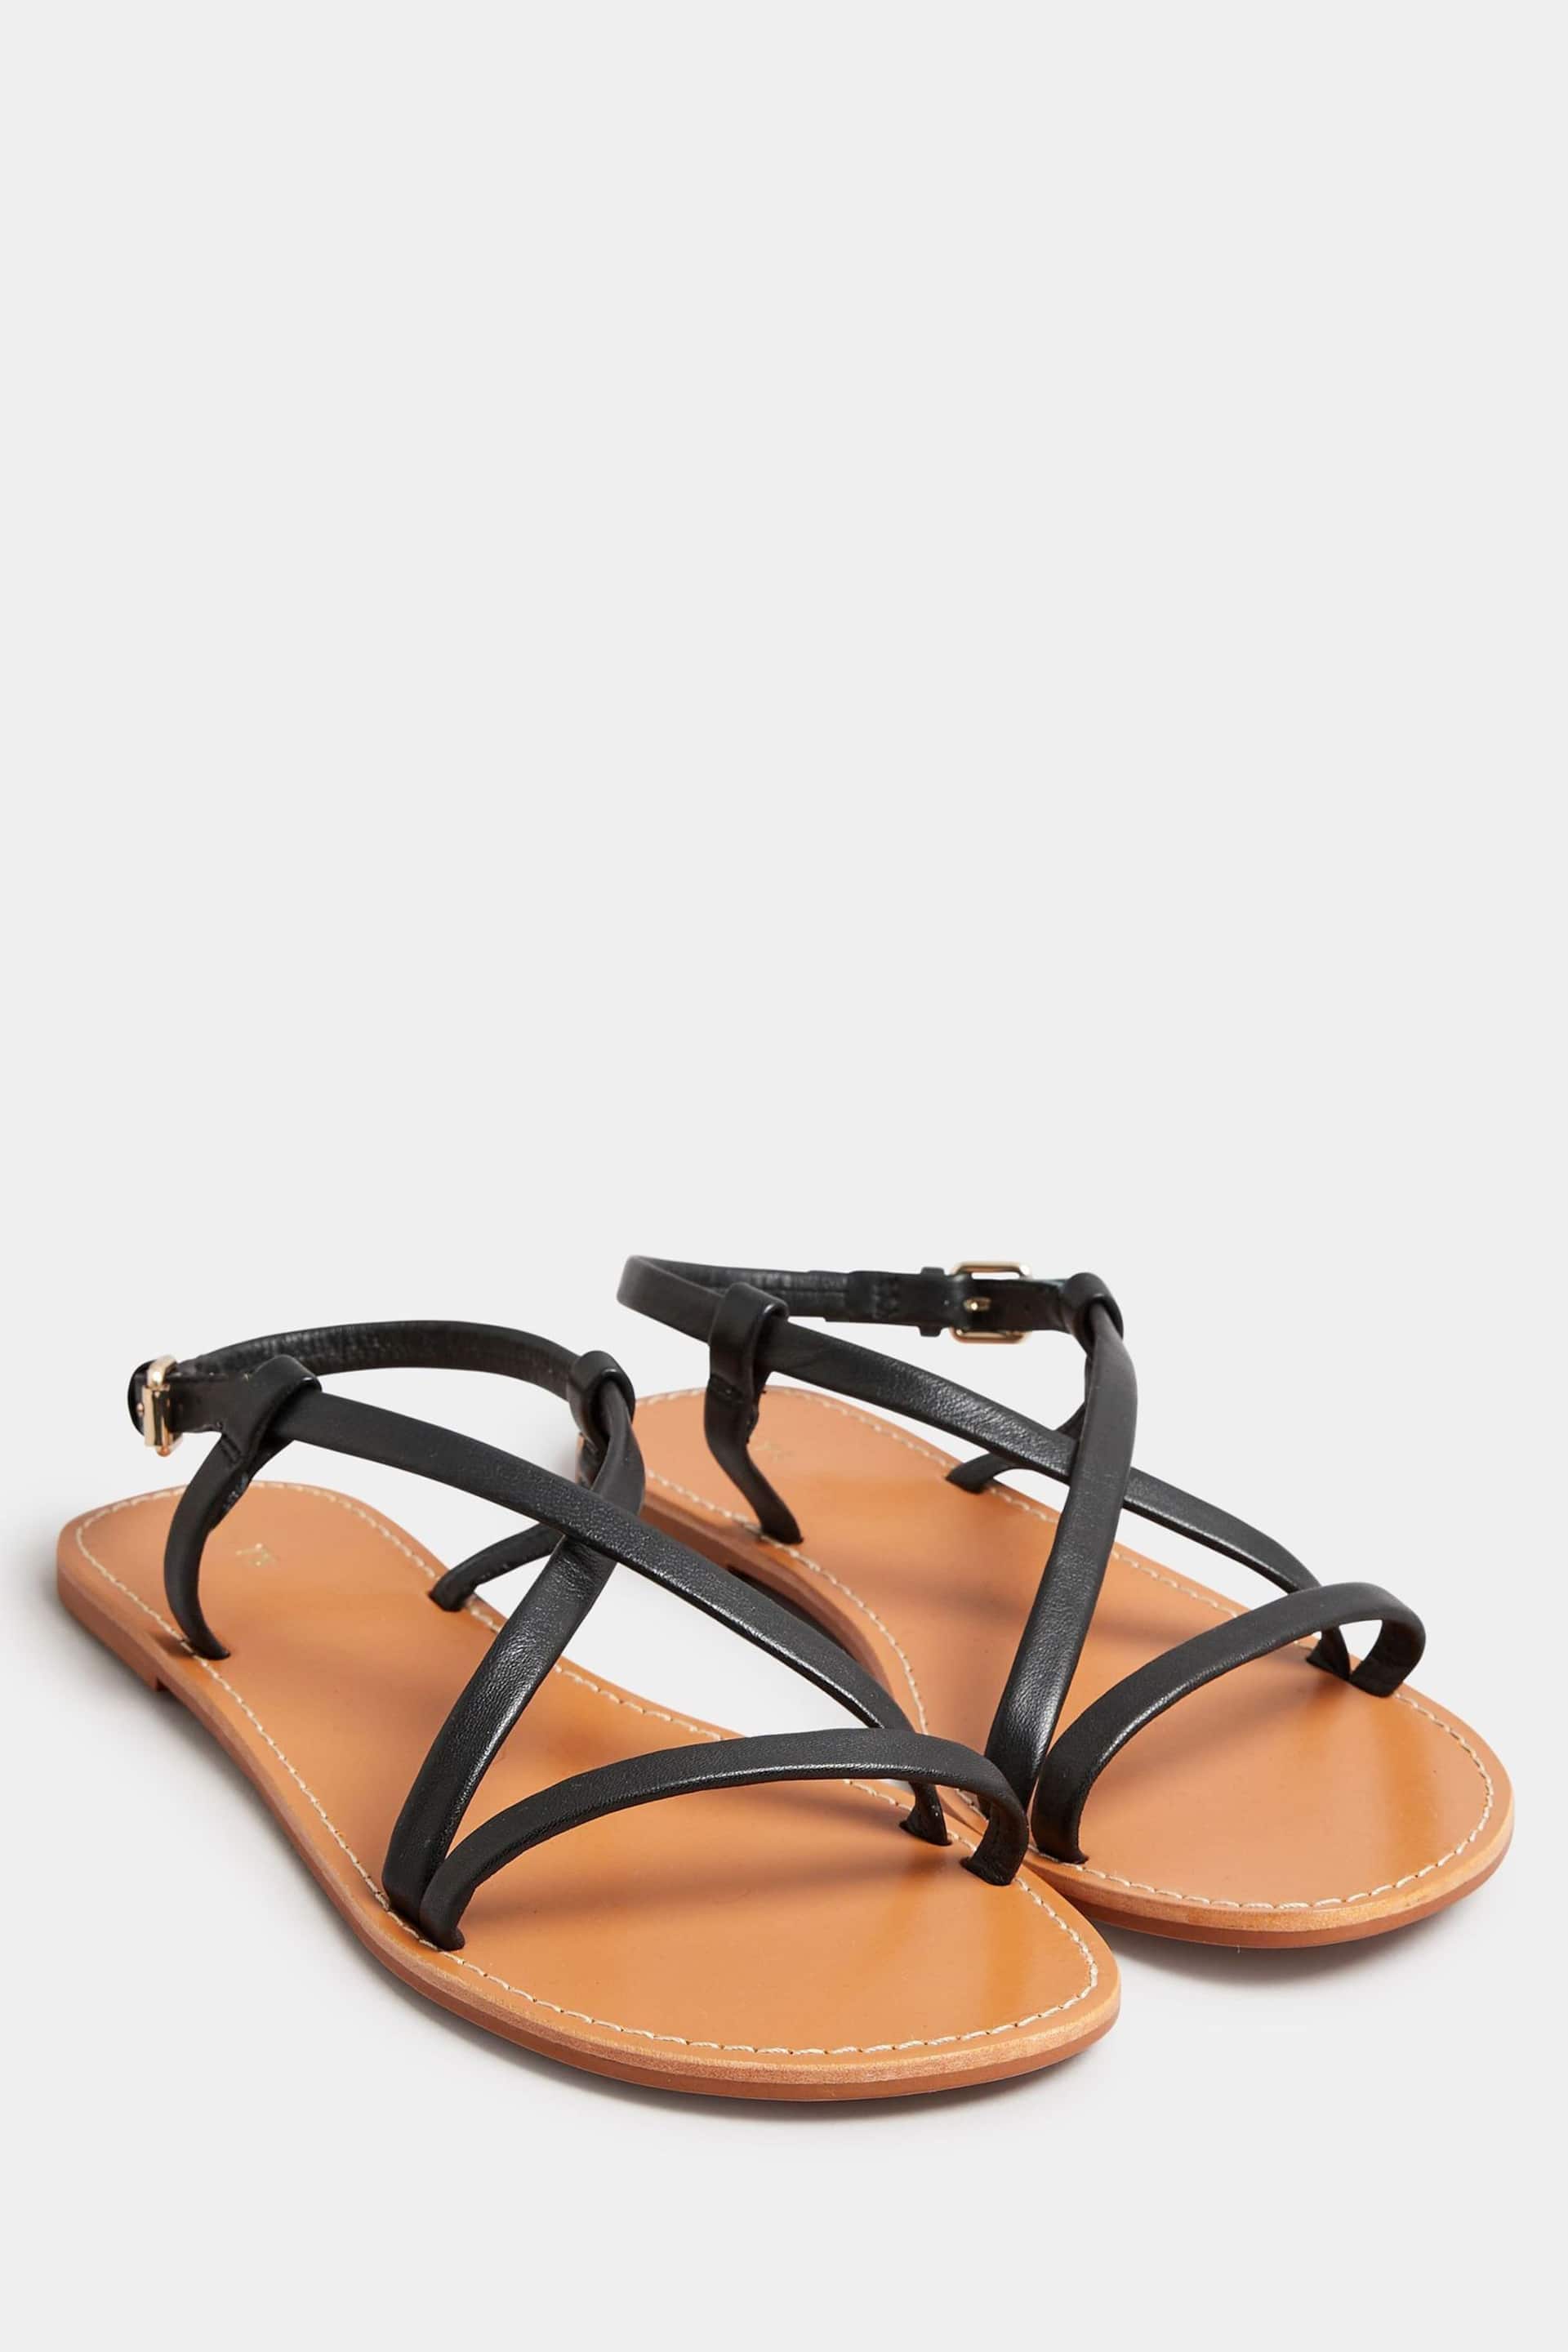 Long Tall Sally Black LTS Black Leather Crossover Strap Flat Sandals In Standard Fit - Image 2 of 3